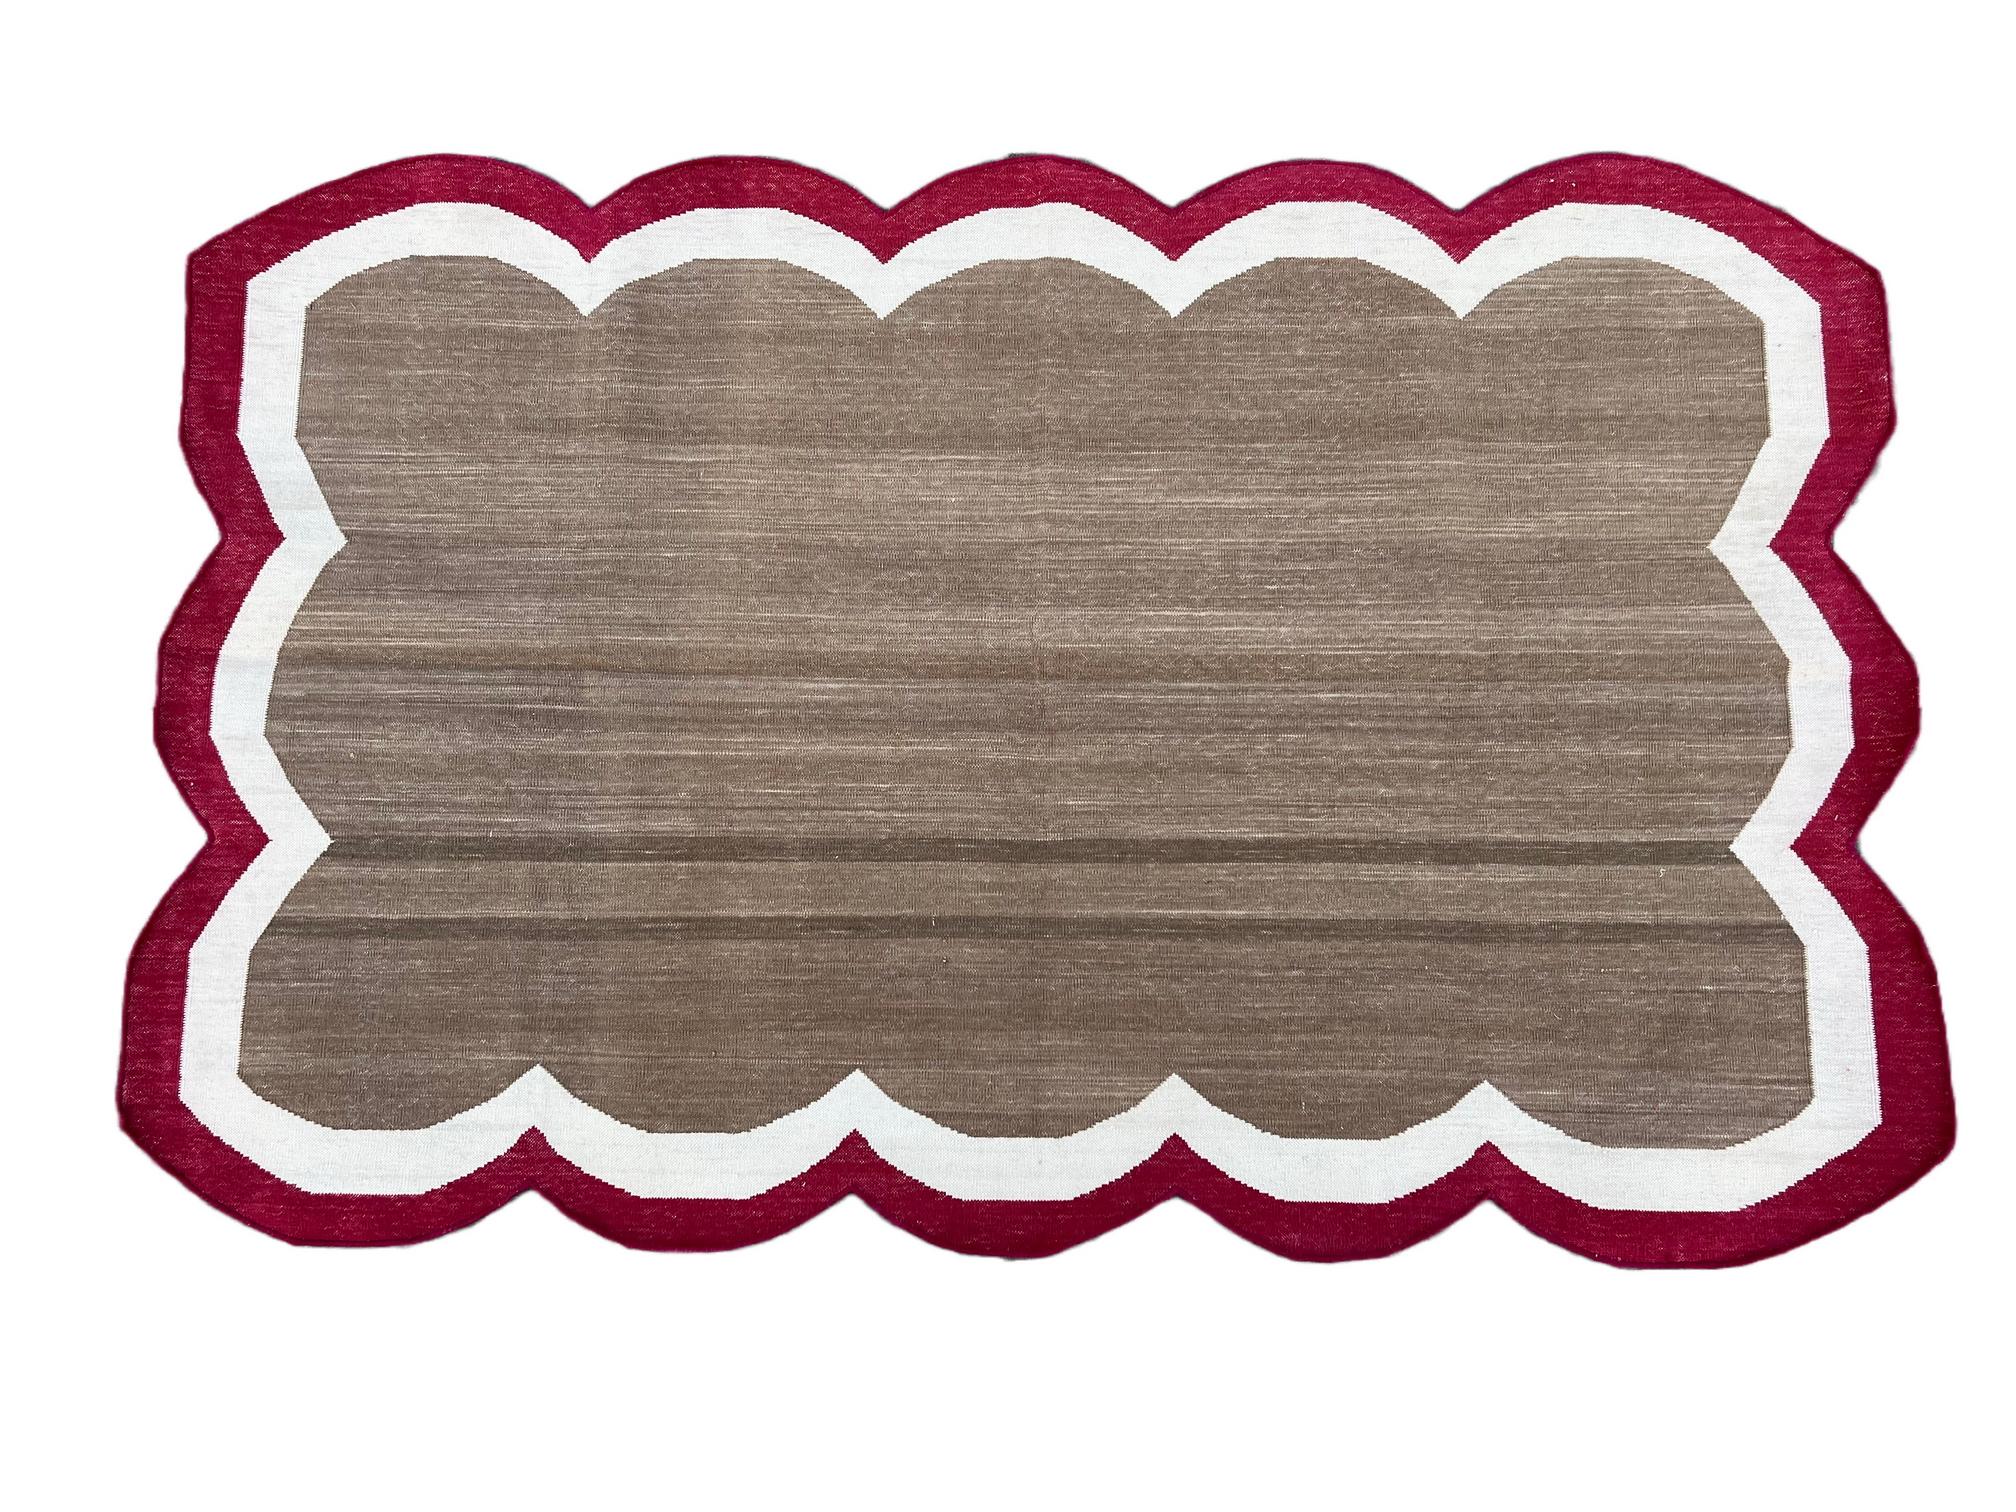 Handmade Cotton Area Flat Weave Rug, 3x5 Brown And Red Scalloped Kilim Dhurrie For Sale 1